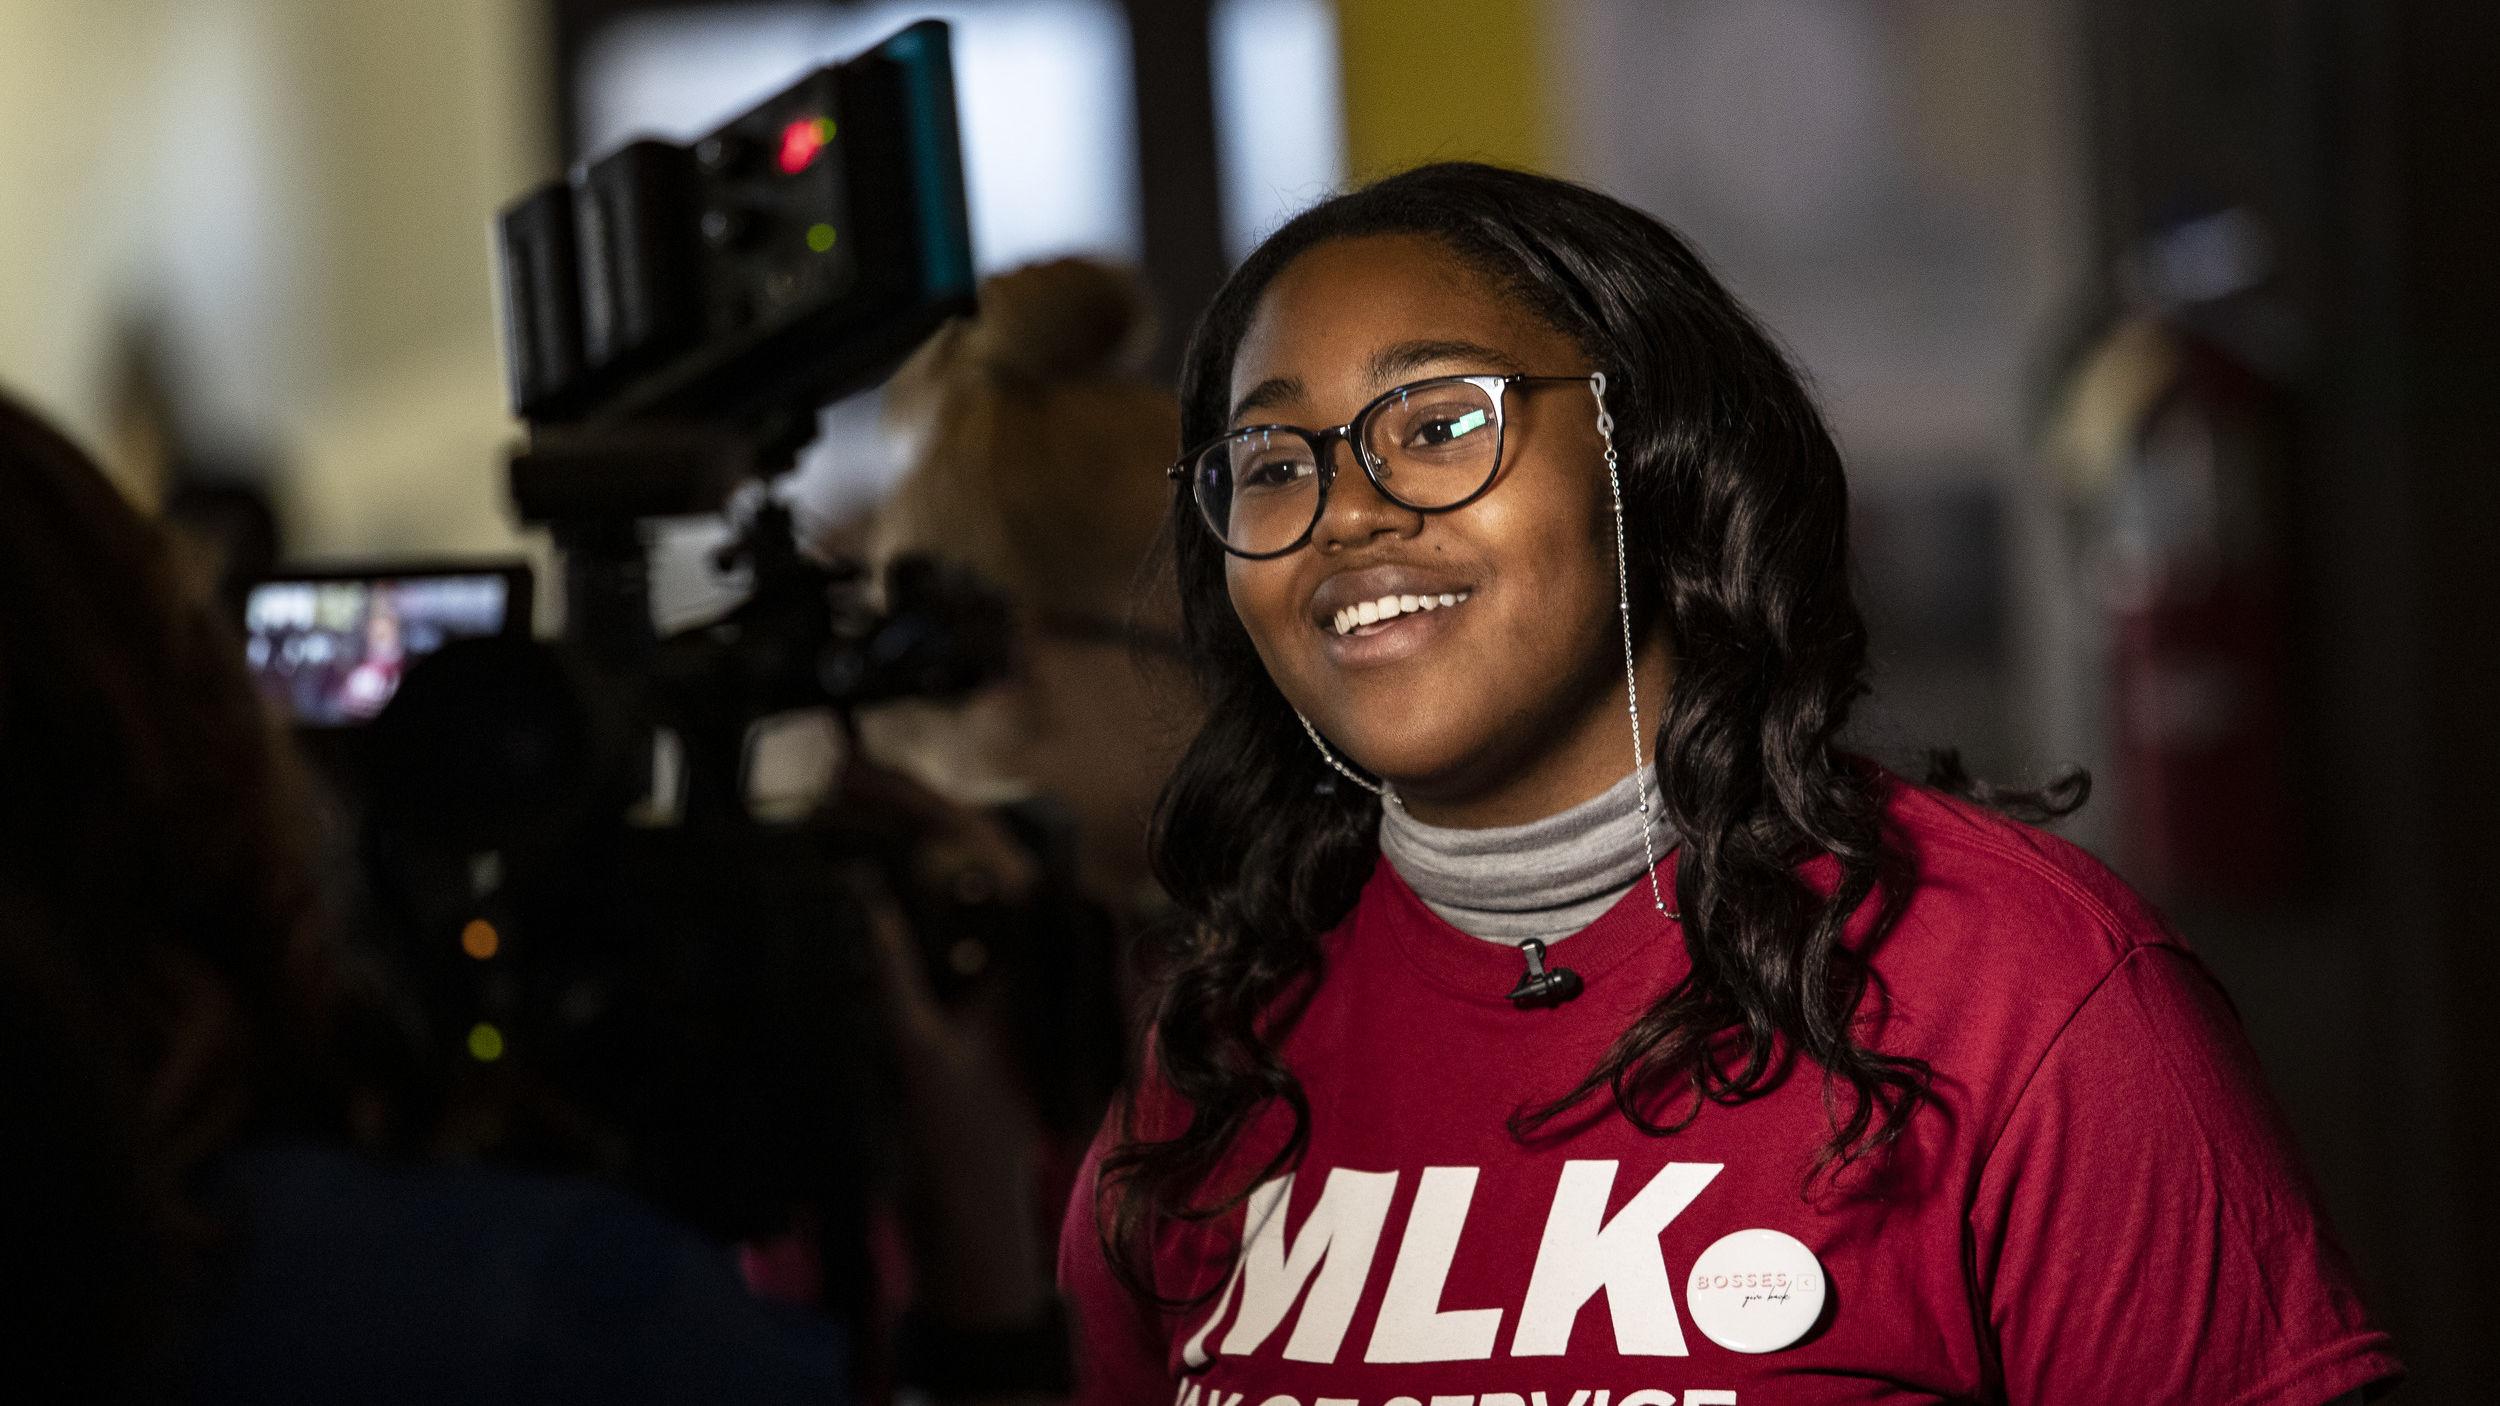 Image of a Black woman wearing a cherry and white MLK Day shirt.